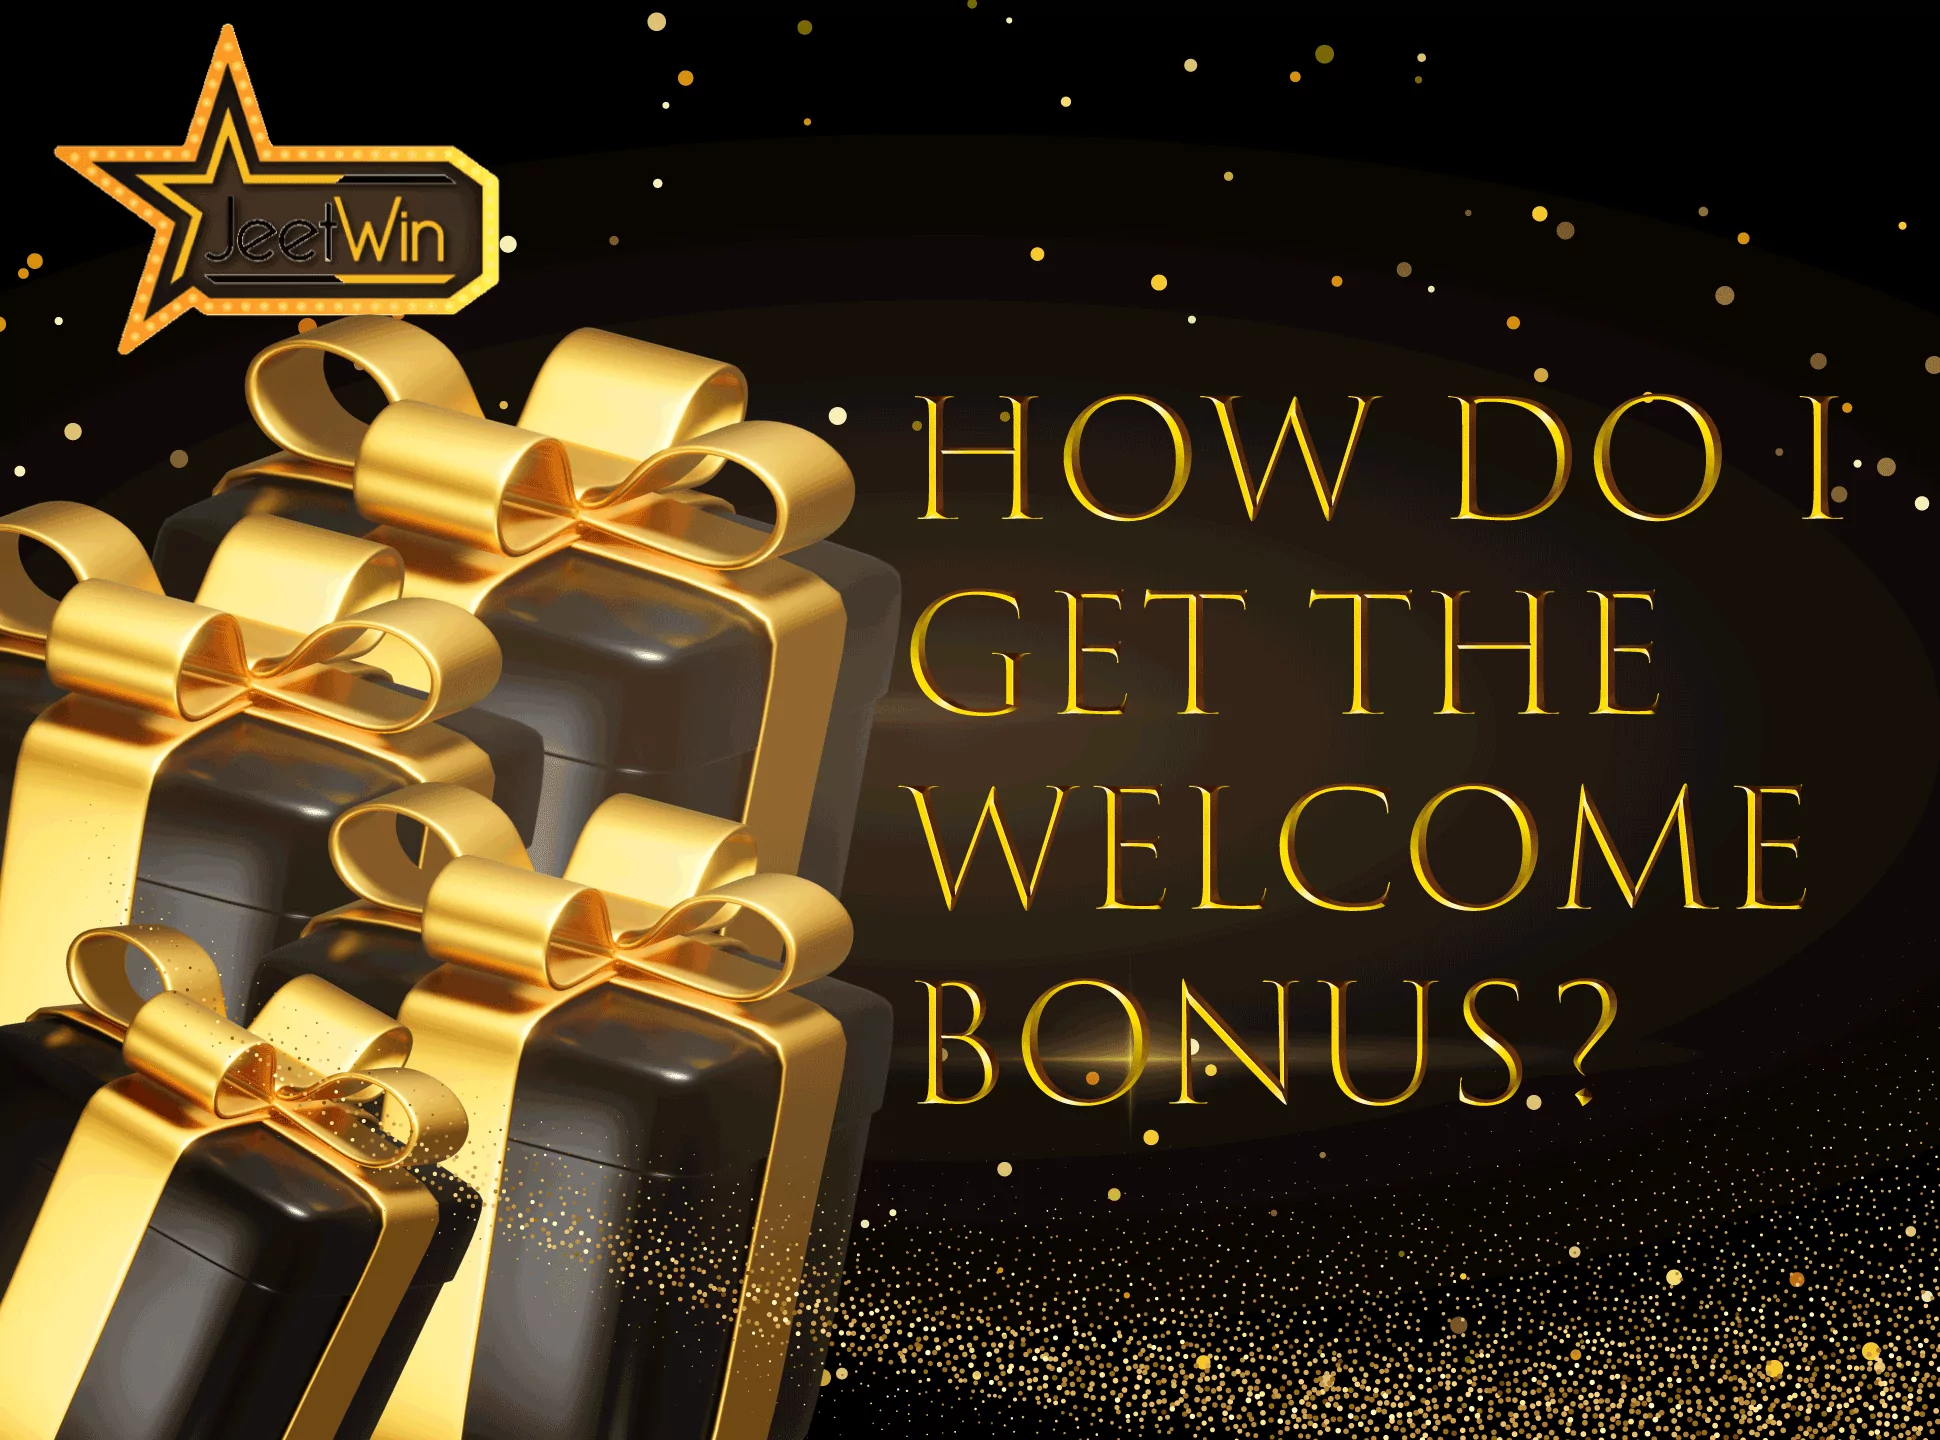 Sign up for Jeetwin and top up the account to get the bonus.